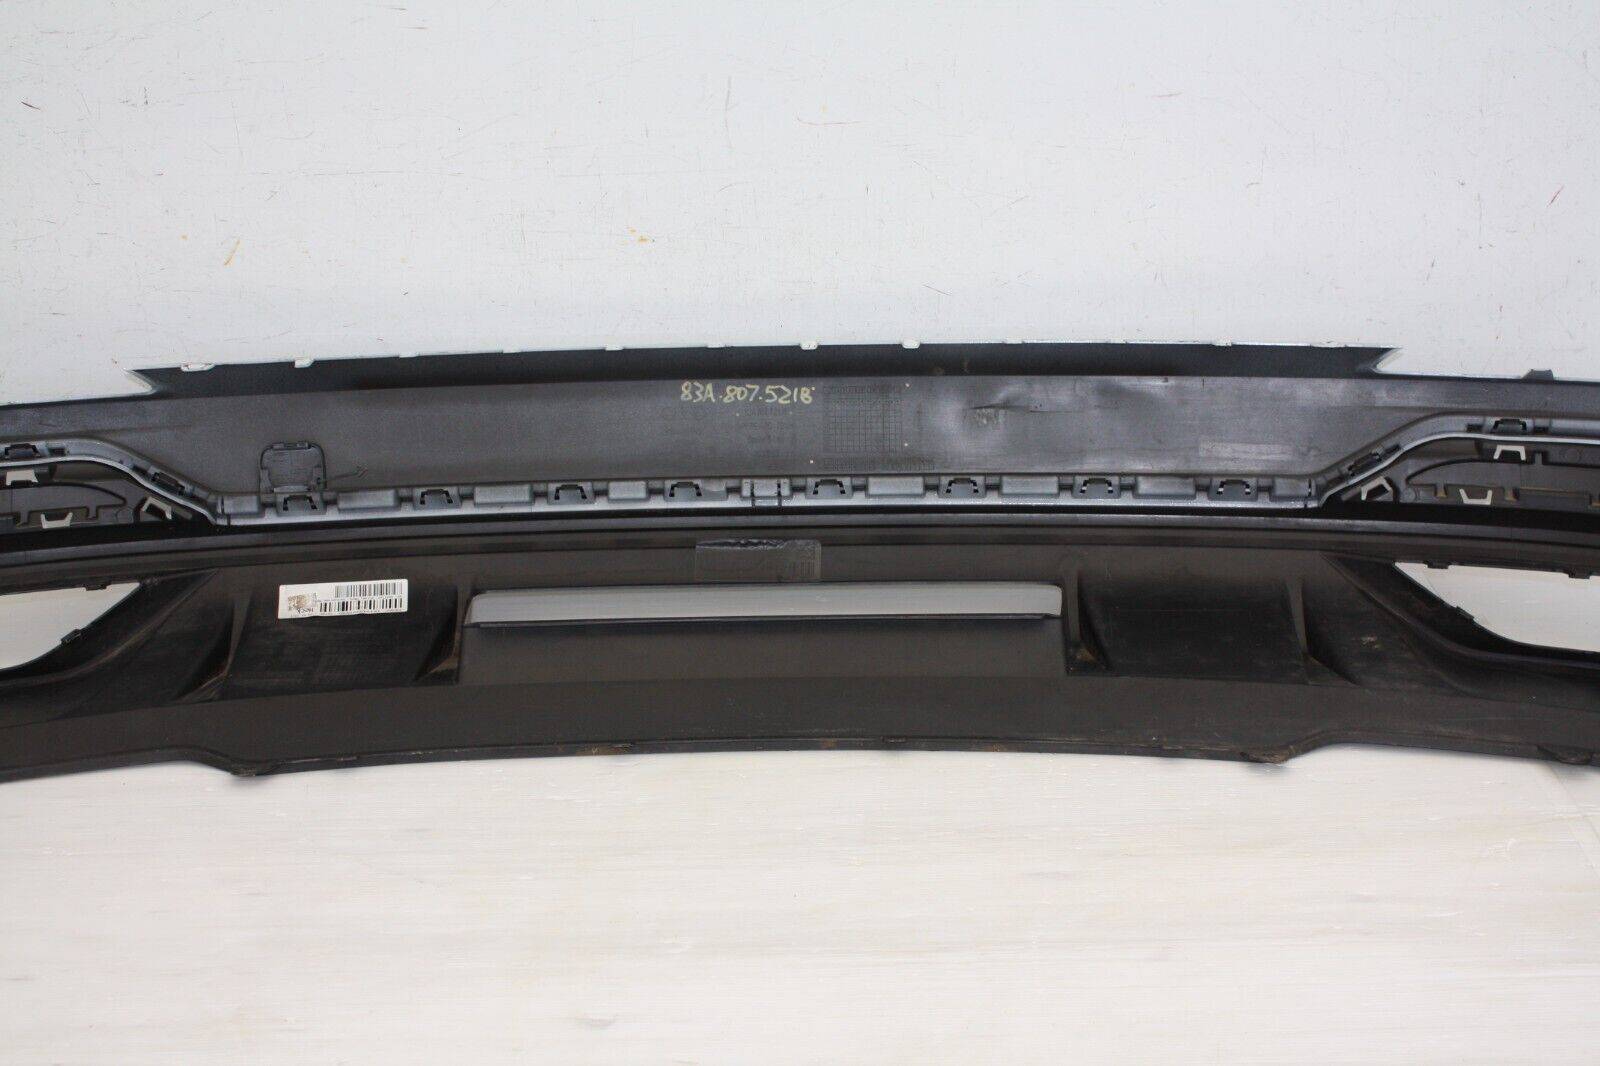 Audi-Q3-S-Line-Rear-Bumper-Lower-Section-With-Diffuser-83A807521B-Genuine-175725856767-16